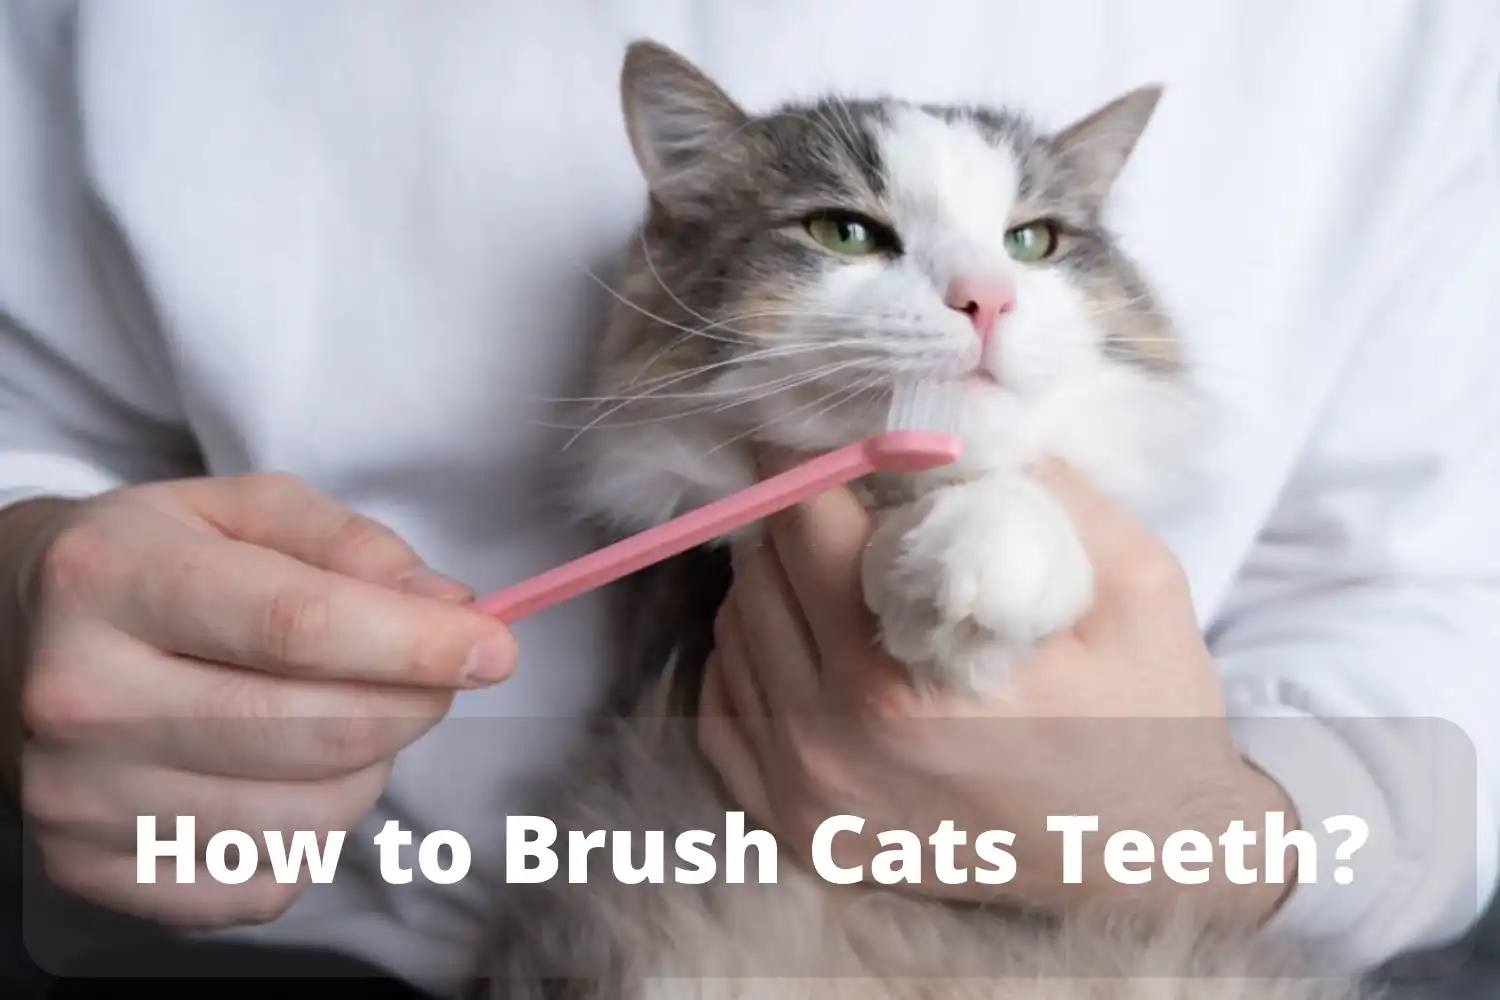 How to Brush Cats Teeth?